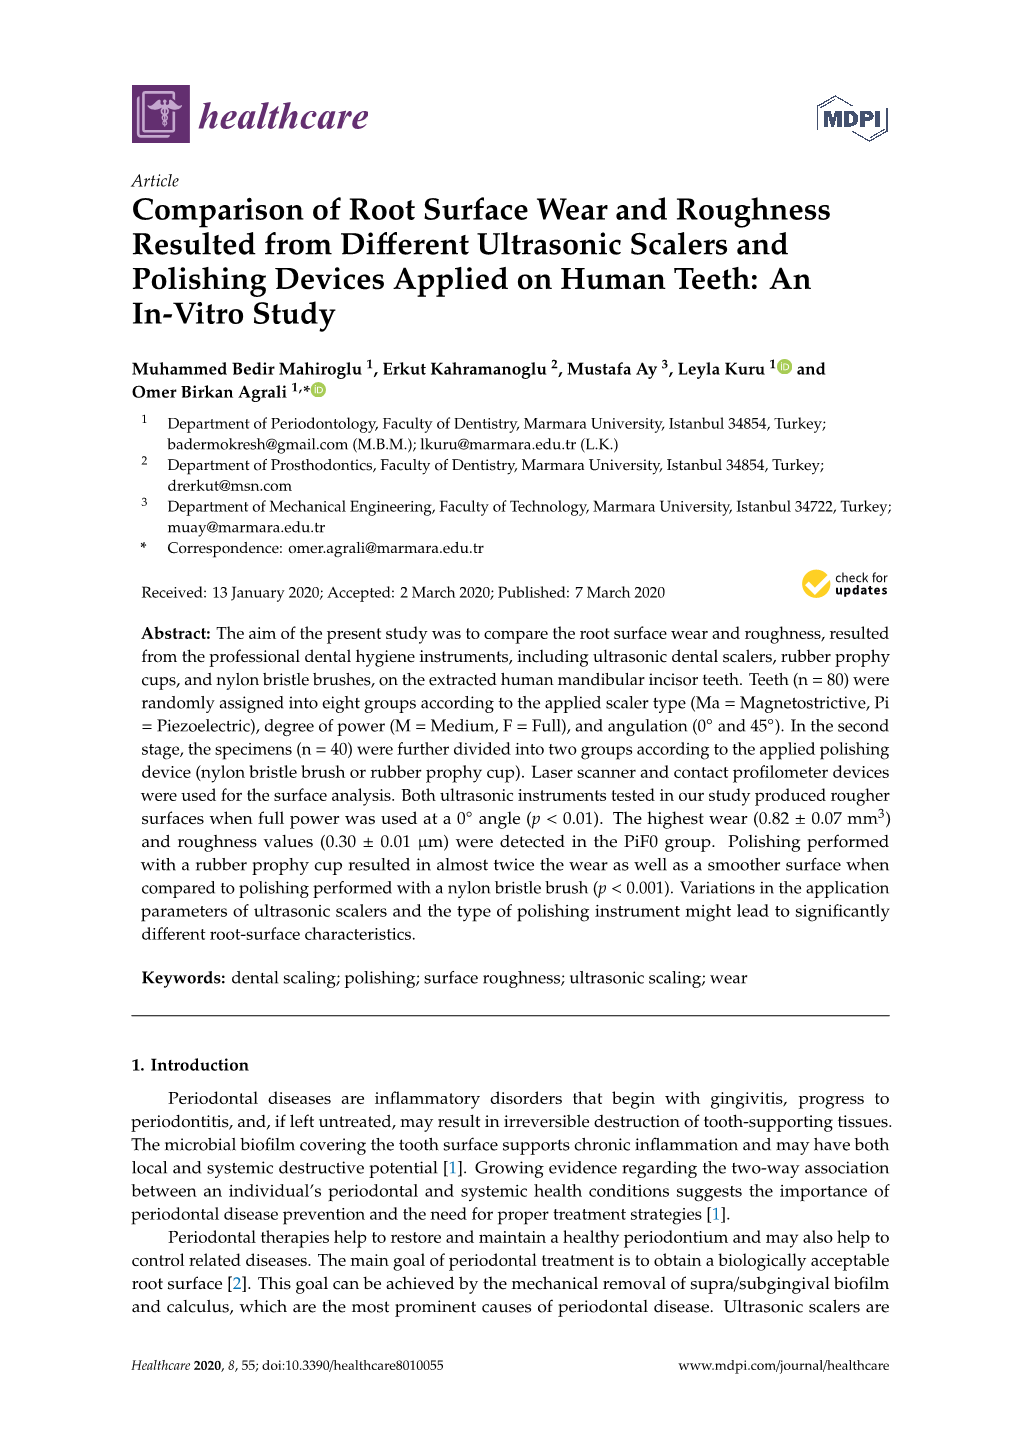 Comparison of Root Surface Wear and Roughness Resulted from Diﬀerent Ultrasonic Scalers and Polishing Devices Applied on Human Teeth: an In-Vitro Study